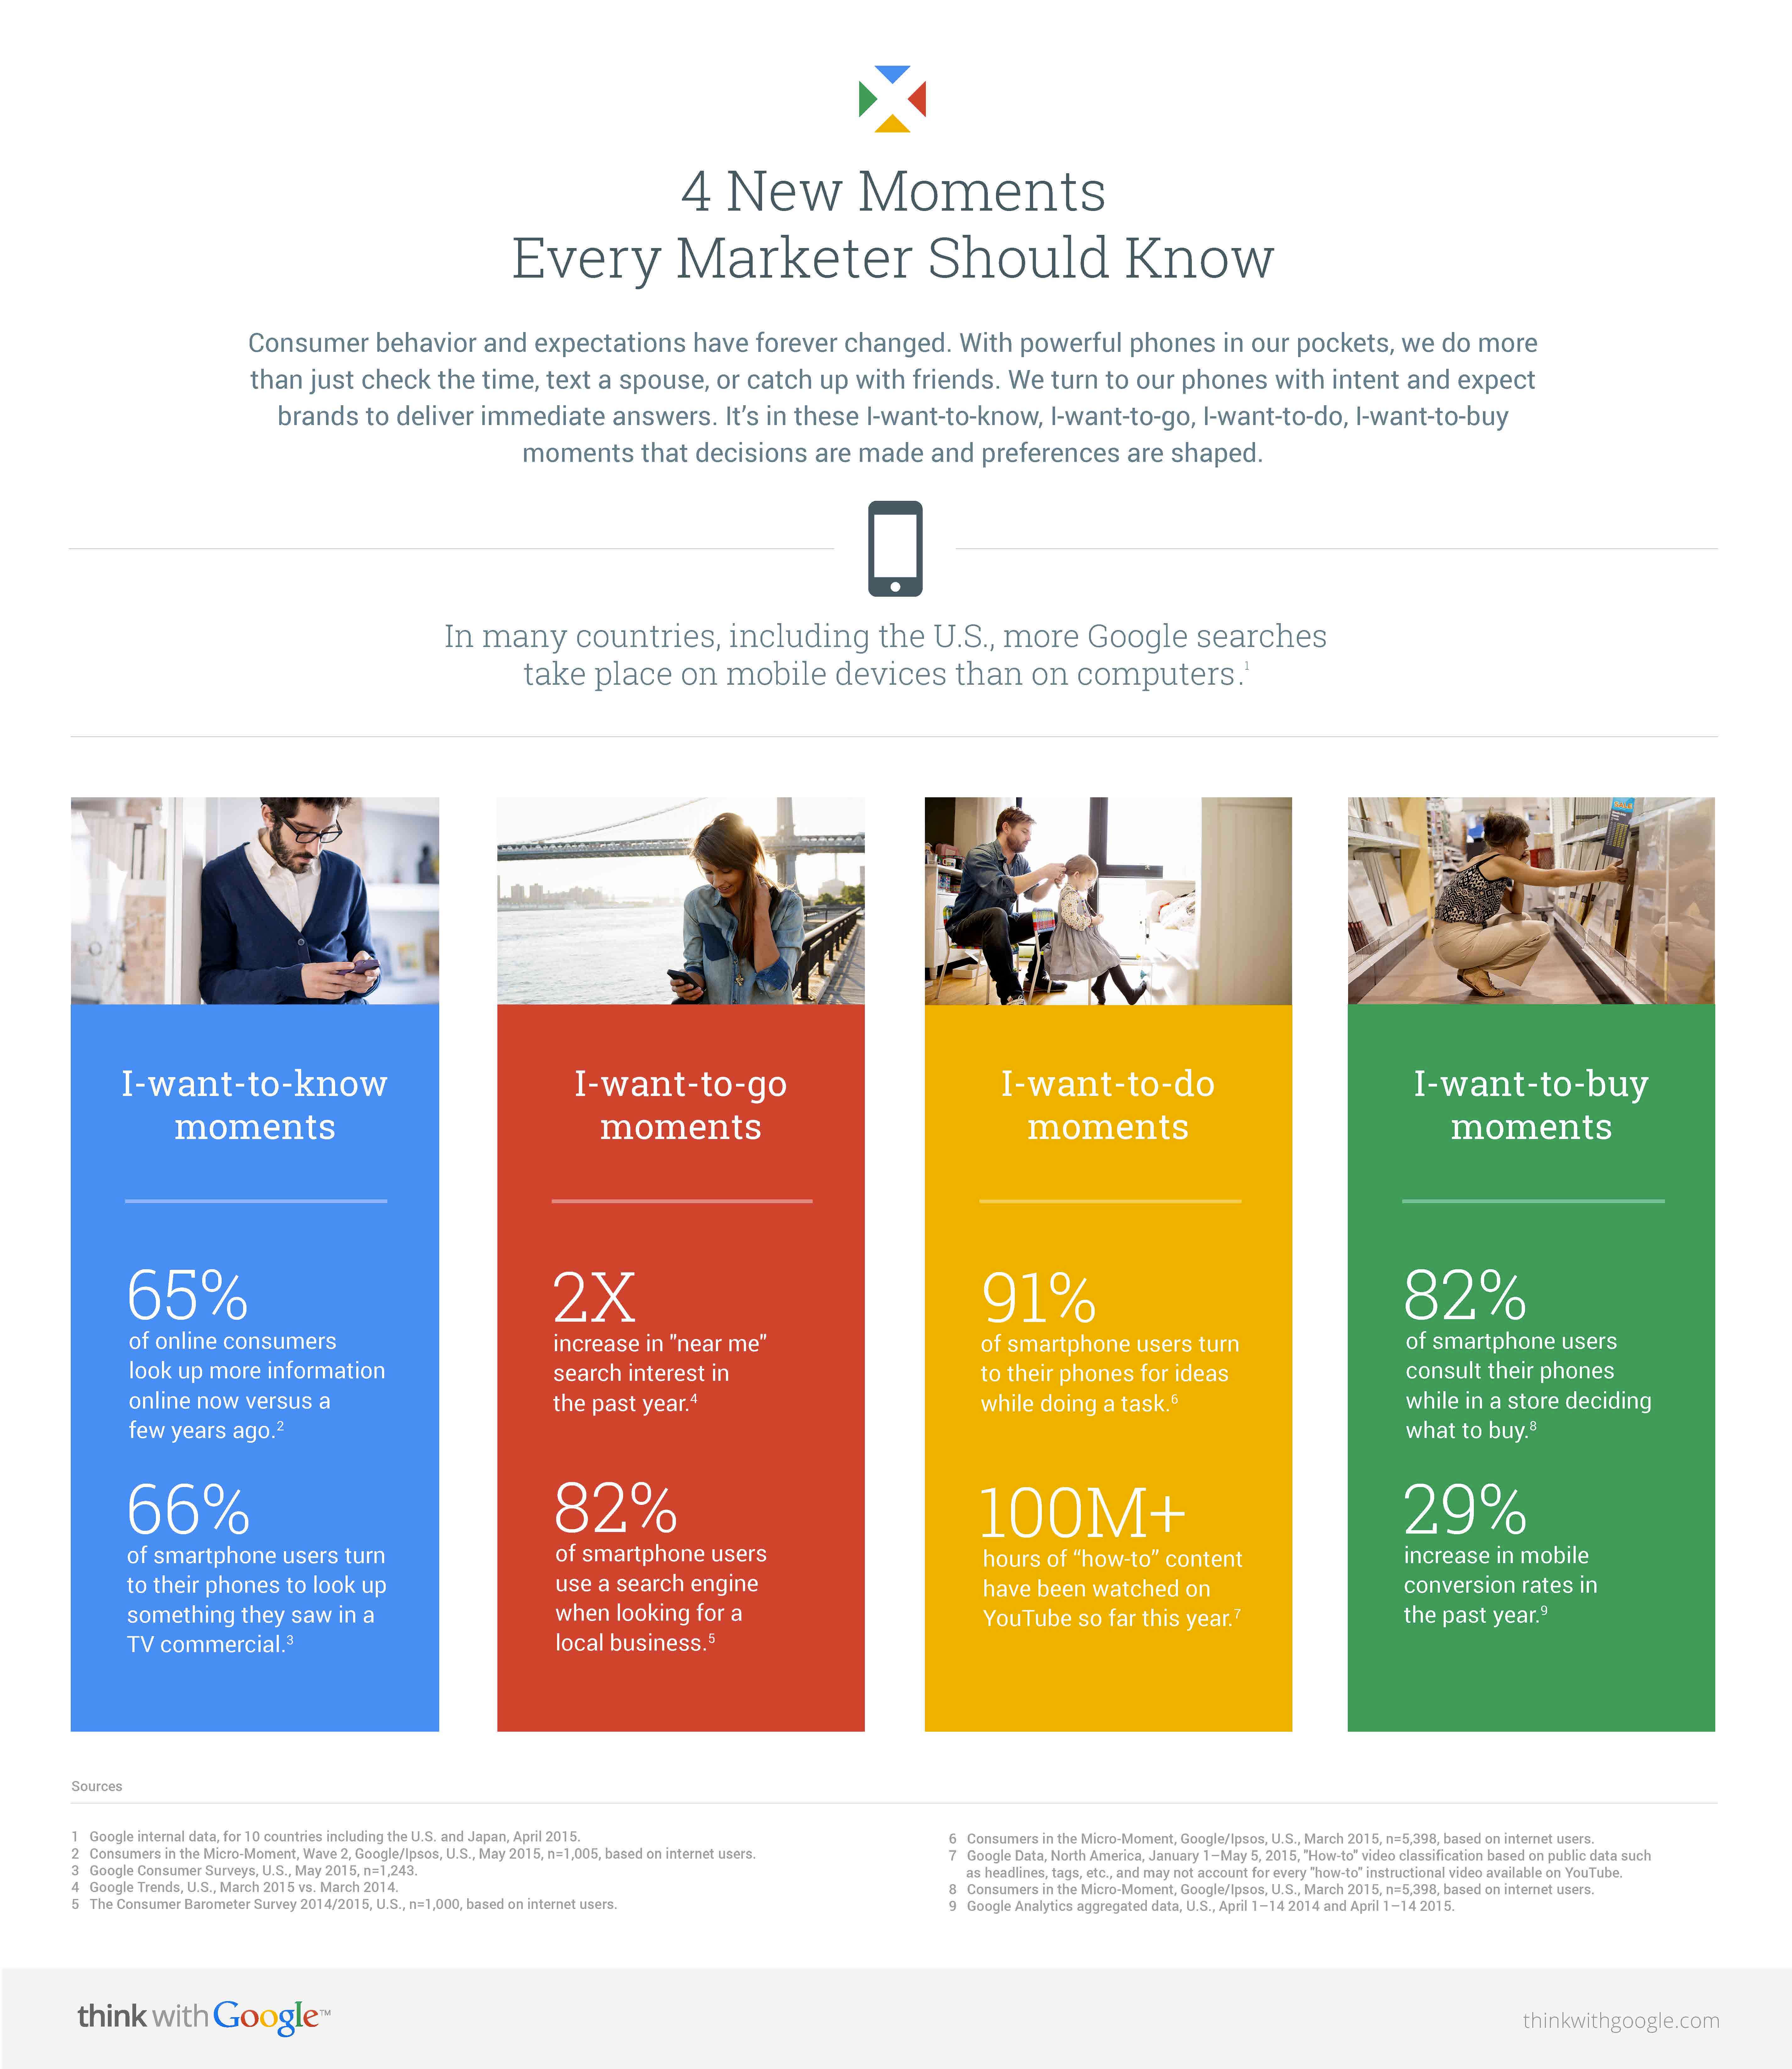 4-new-moments-every-marketer-should-know